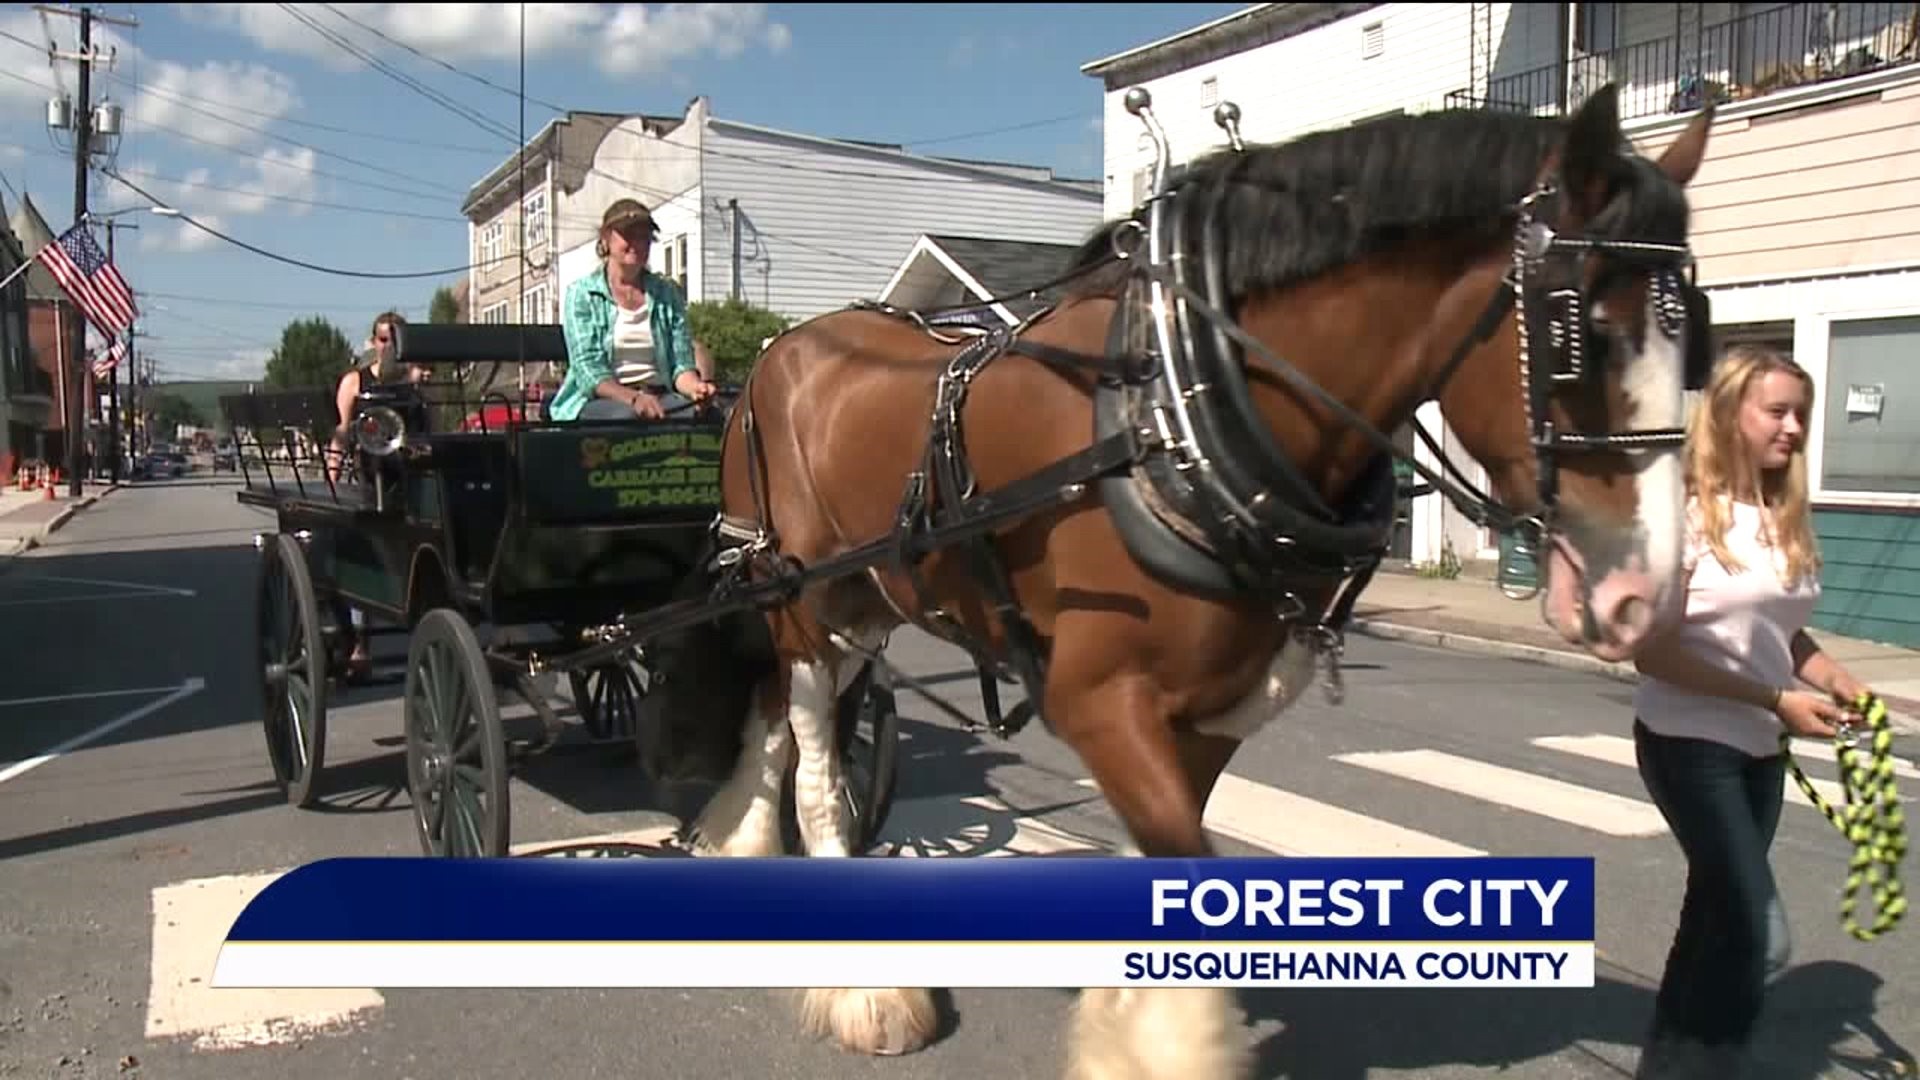 Trail Town Festival Held in Susquehanna County